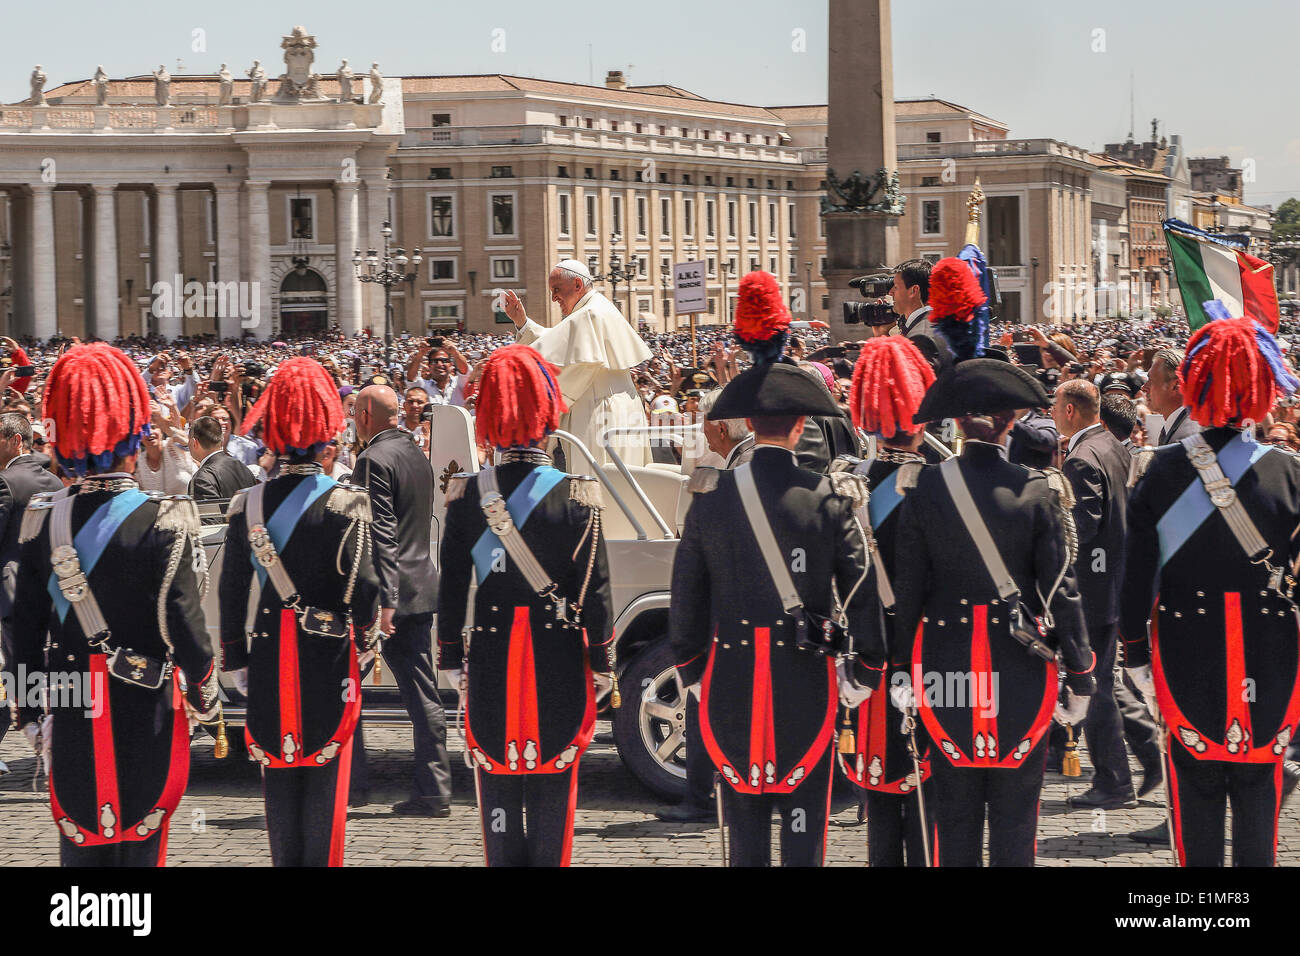 Vatican City  06th June 2014  Extraordinary Audience of the Pope Francis components of the Carabinieri on the occasion of the Bicentennial of the Force Credit:  Realy Easy Star/Alamy Live News Stock Photo